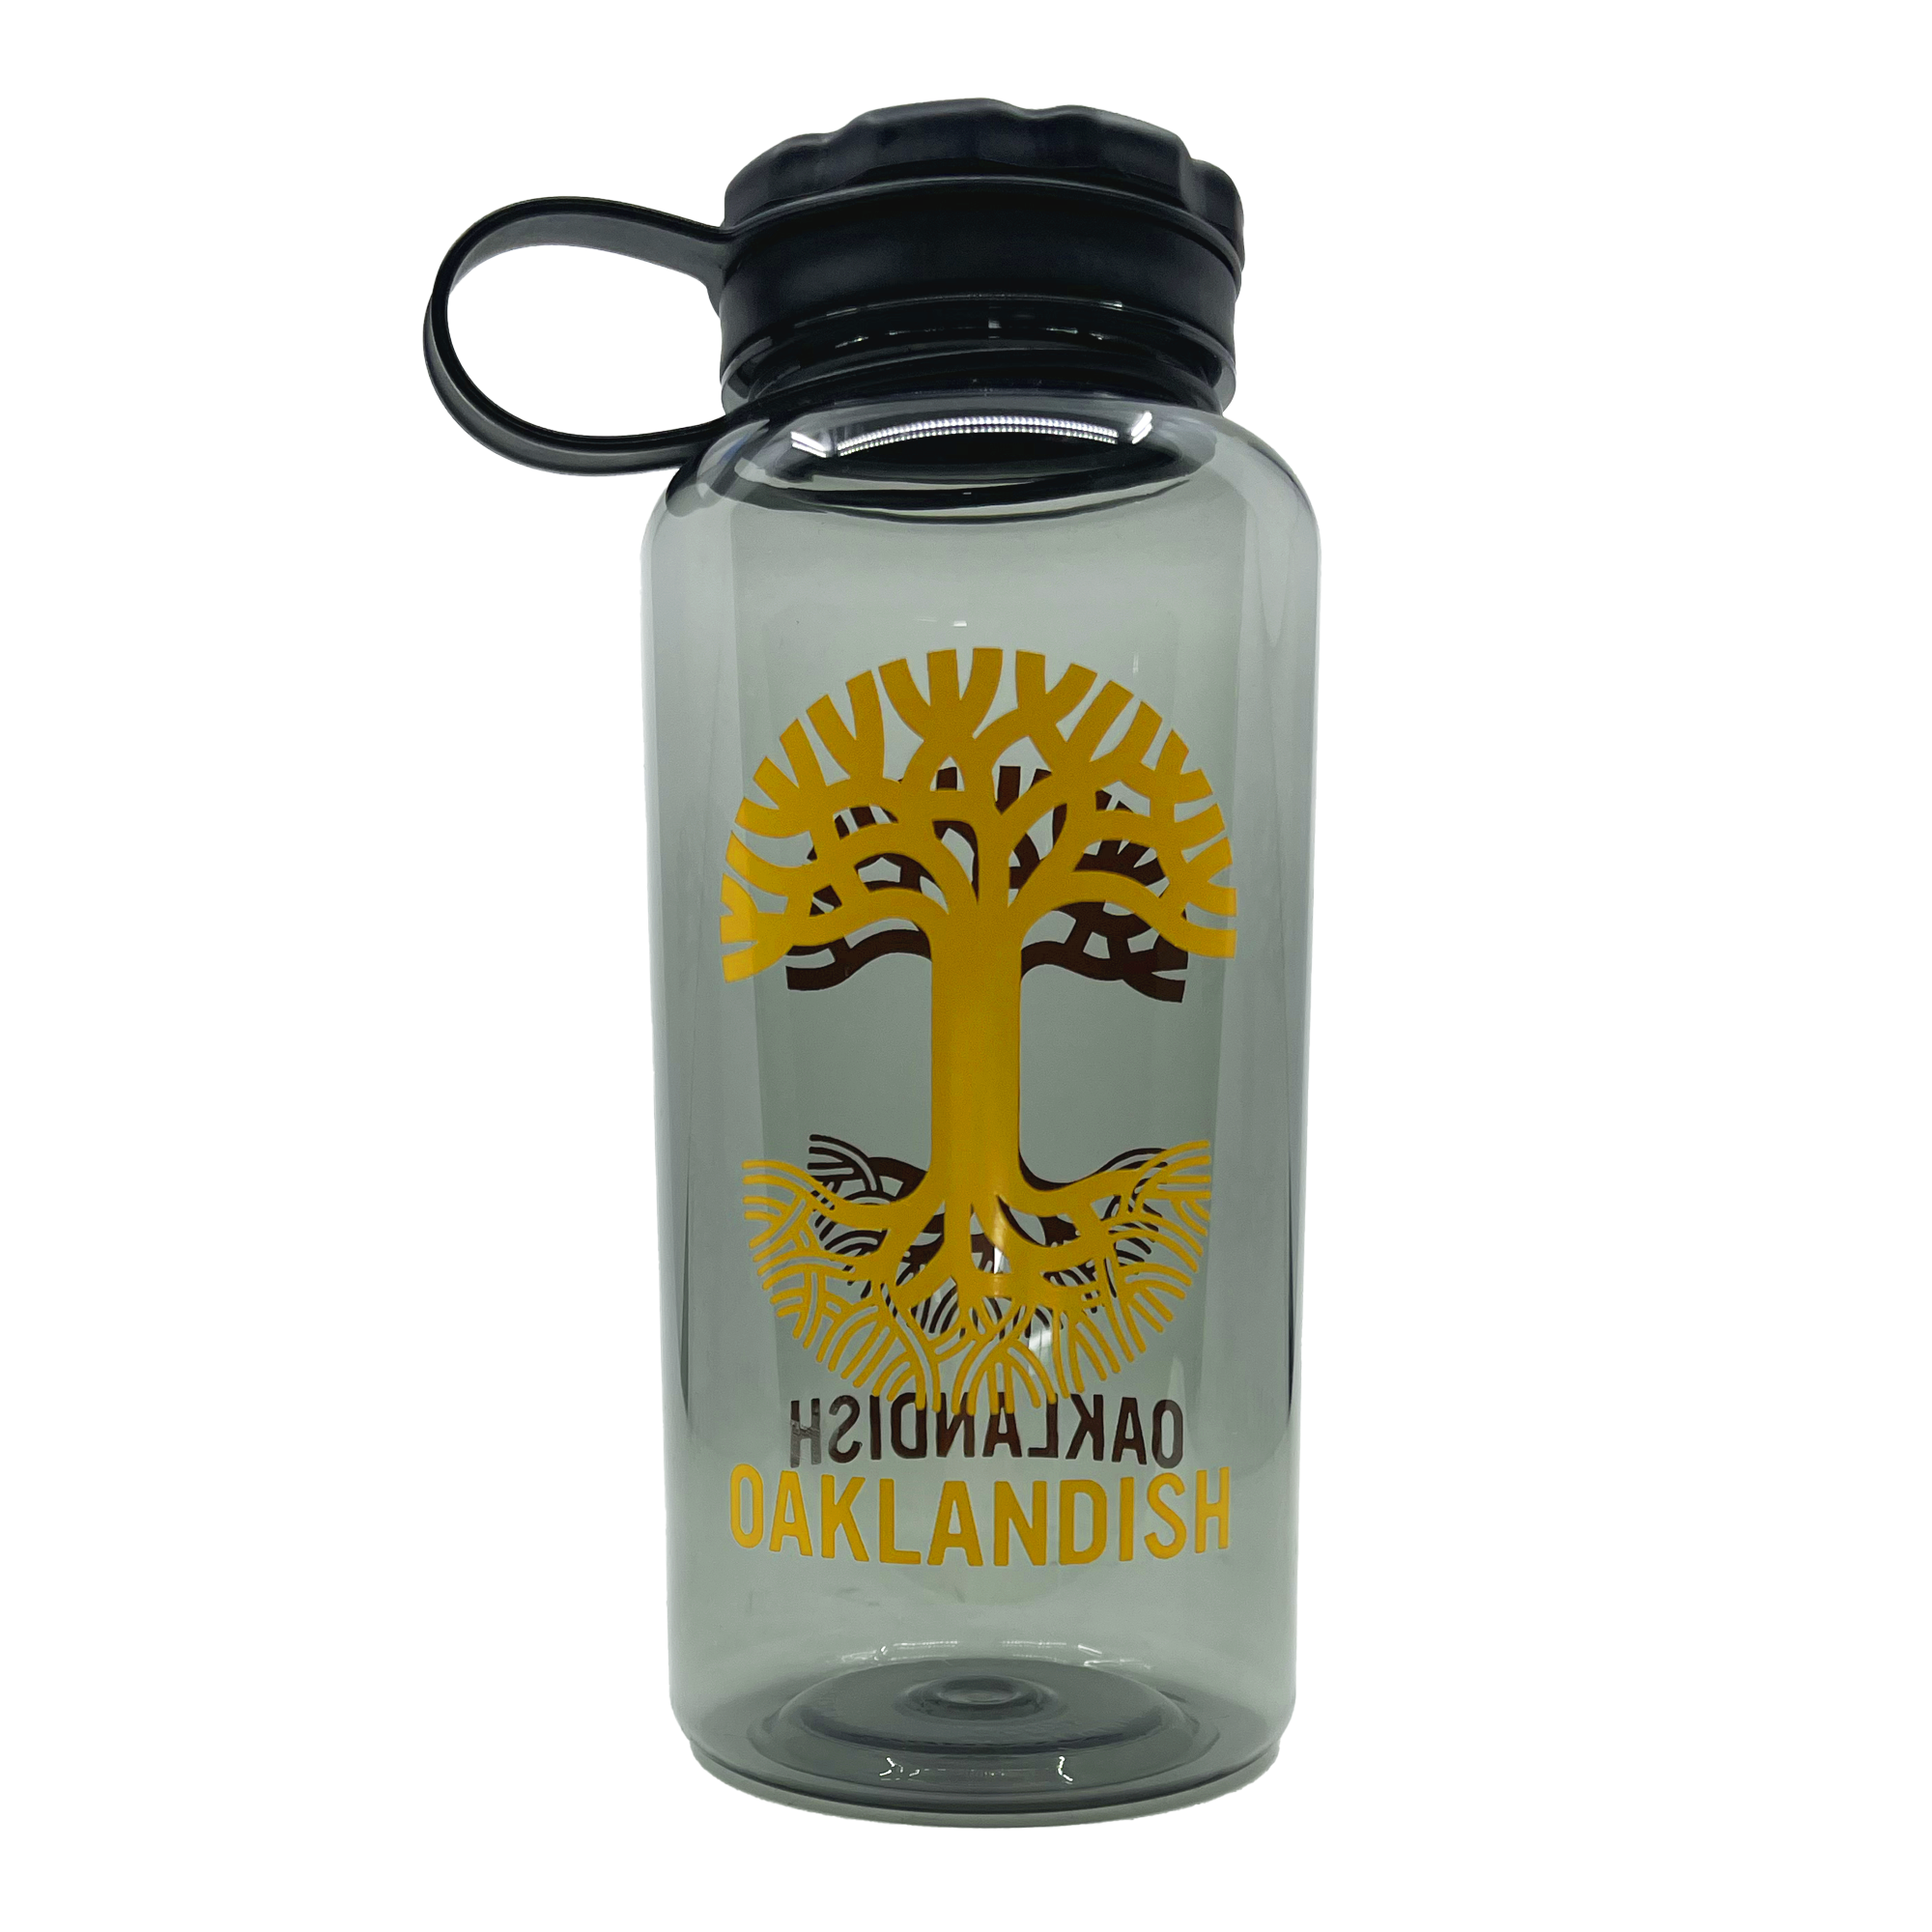 Translucent grey water bottle with screw-on black lid with yellow Oaklandish tree logo and text, head on.